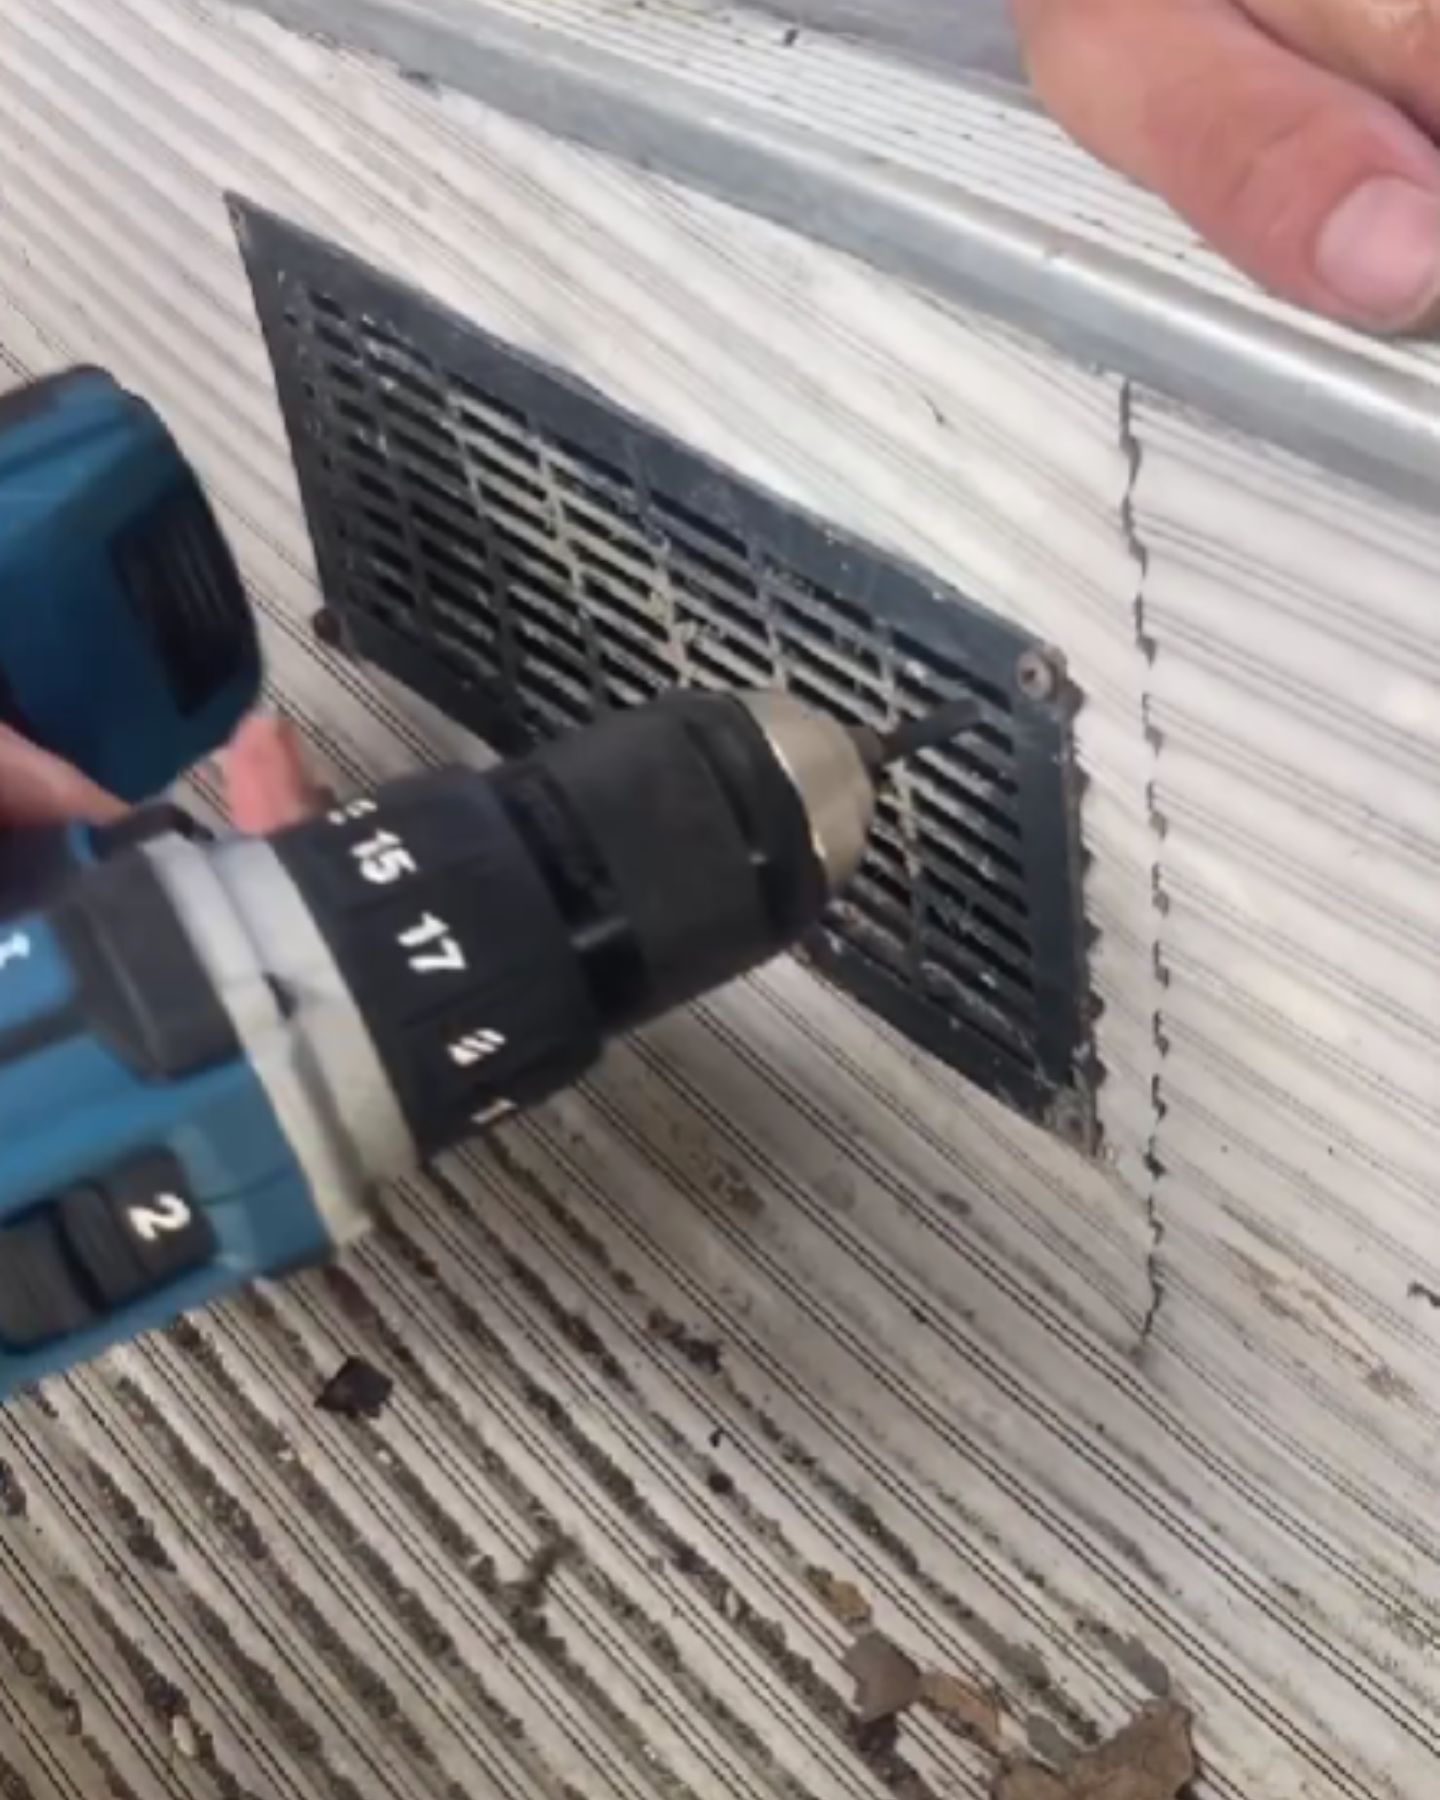 man opening up a vent with a drill